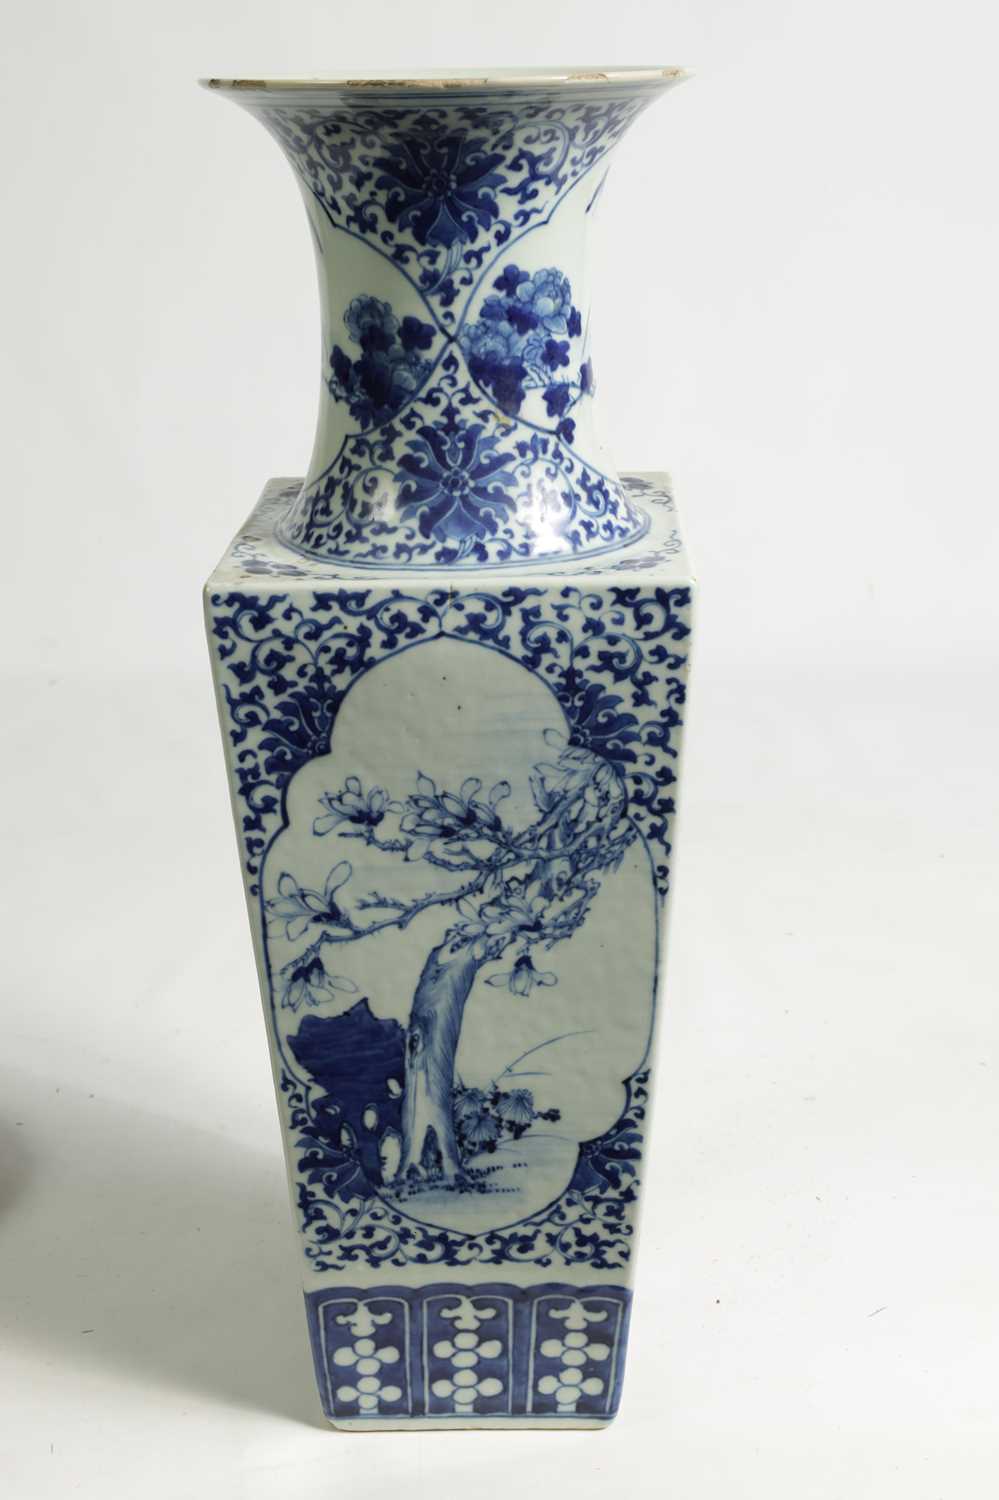 A GOOD 18TH/19TH CENTURY CHINESE BLUE AND WHITE PORCELAIN SQUARE TAPERING VASE - Image 10 of 19